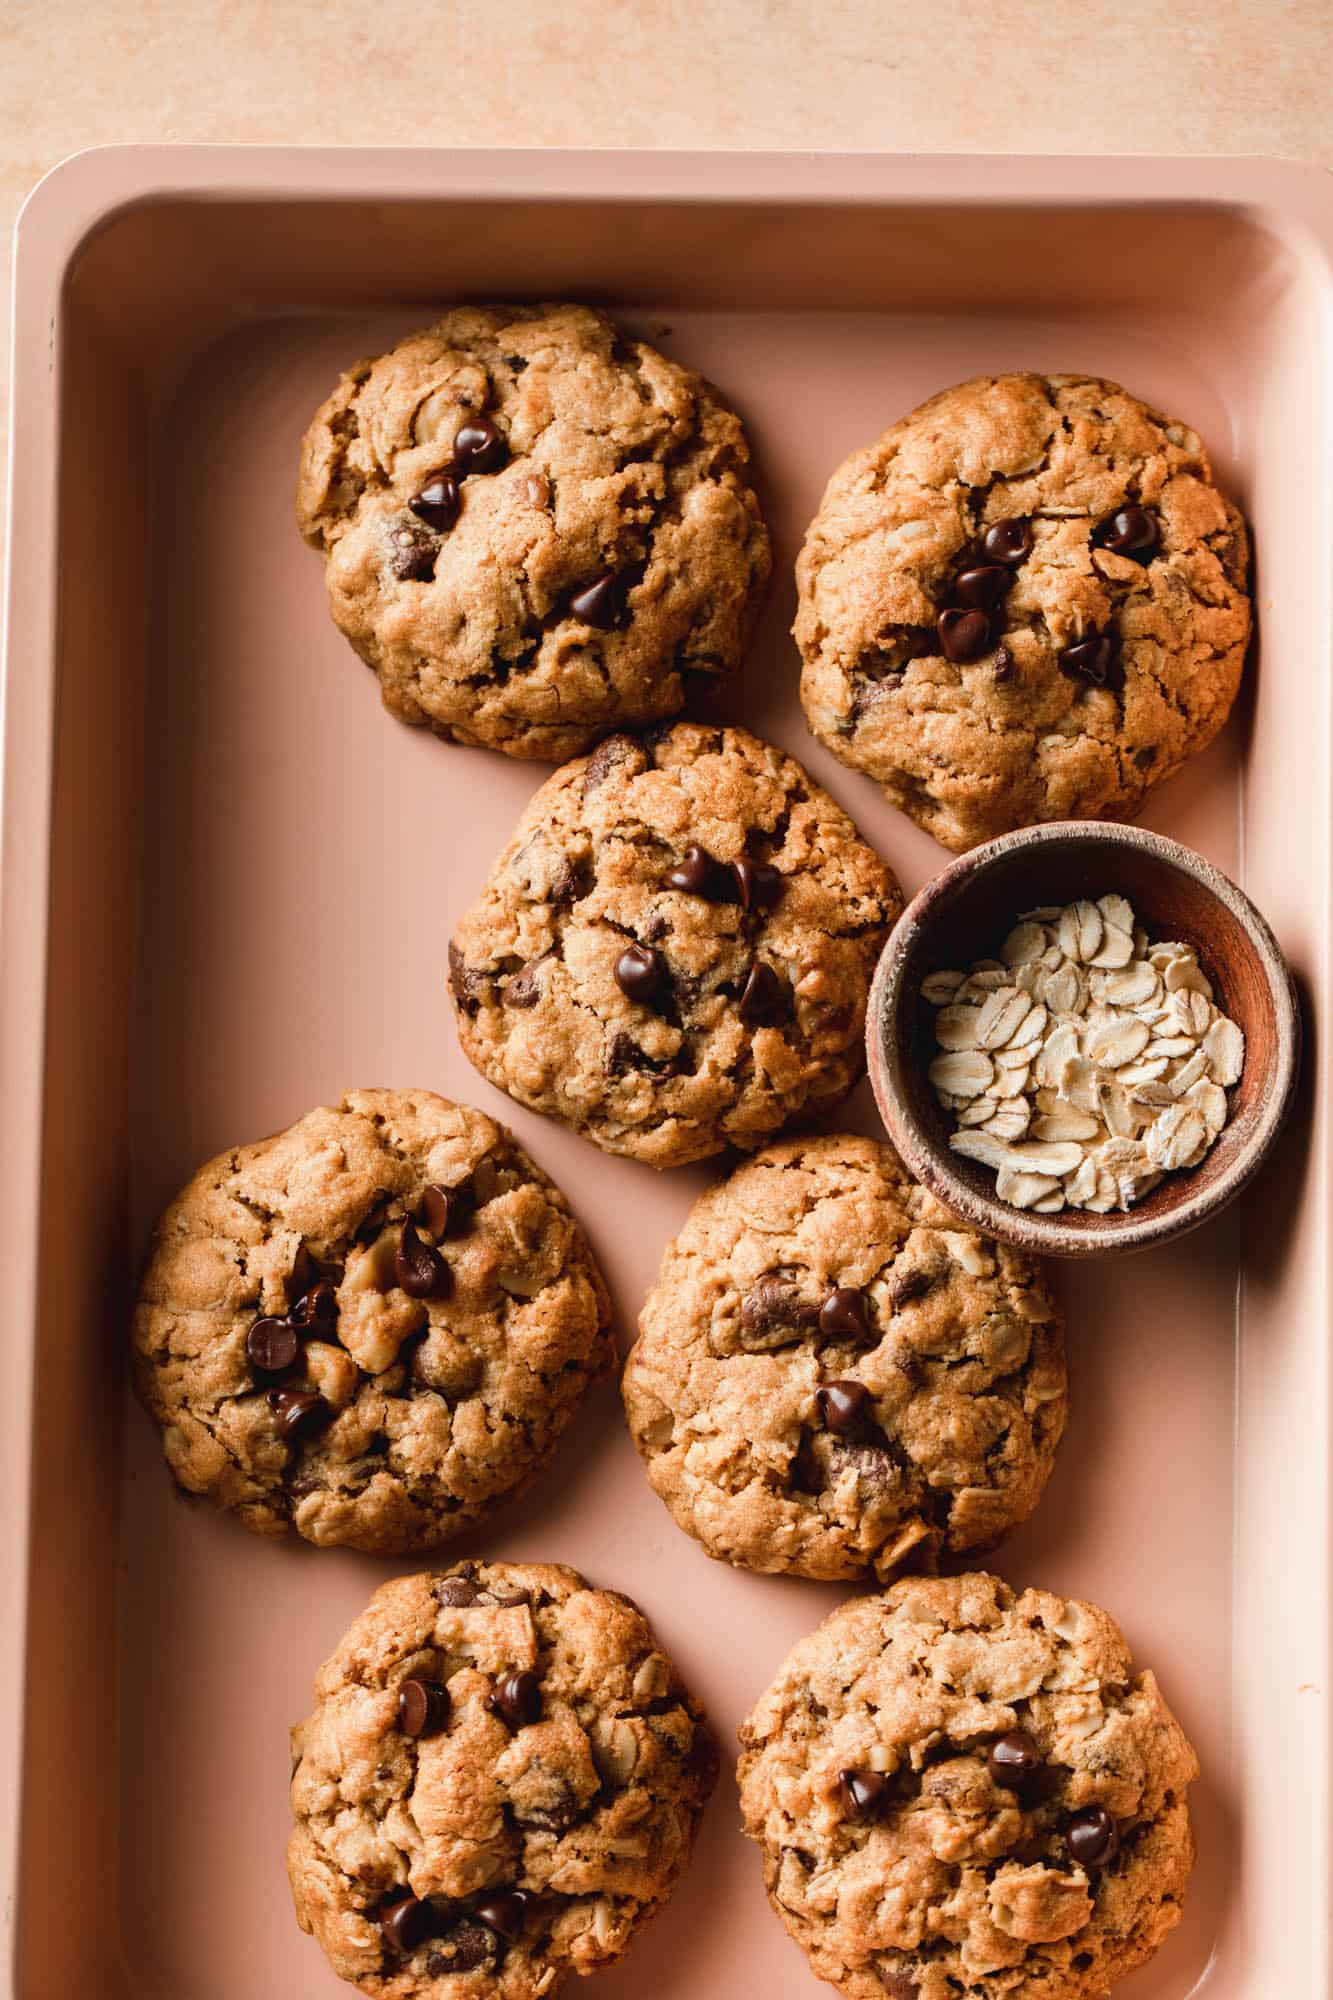 A pan of vegan peanut butter oatmeal cookies bursting with chocolate chips and walnuts.